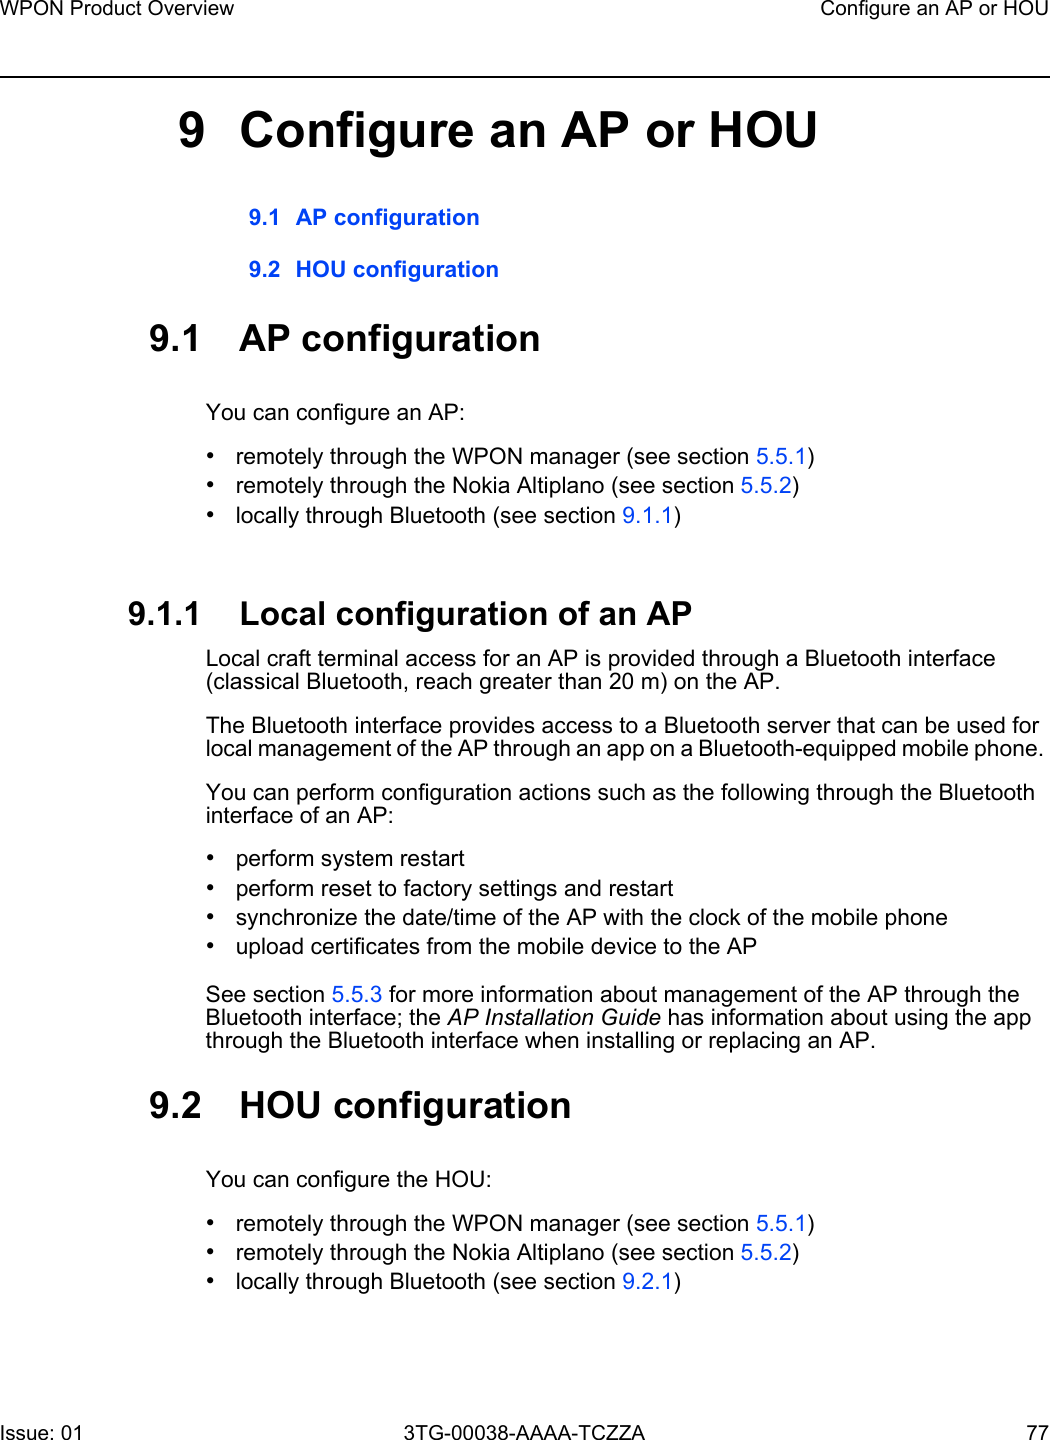 WPON Product Overview Configure an AP or HOUIssue: 01 3TG-00038-AAAA-TCZZA 77 9 Configure an AP or HOU9.1 AP configuration9.2 HOU configuration9.1 AP configurationYou can configure an AP:•remotely through the WPON manager (see section 5.5.1)•remotely through the Nokia Altiplano (see section 5.5.2)•locally through Bluetooth (see section 9.1.1)9.1.1 Local configuration of an APLocal craft terminal access for an AP is provided through a Bluetooth interface (classical Bluetooth, reach greater than 20 m) on the AP.The Bluetooth interface provides access to a Bluetooth server that can be used for local management of the AP through an app on a Bluetooth-equipped mobile phone. You can perform configuration actions such as the following through the Bluetooth interface of an AP:•perform system restart•perform reset to factory settings and restart•synchronize the date/time of the AP with the clock of the mobile phone•upload certificates from the mobile device to the APSee section 5.5.3 for more information about management of the AP through the Bluetooth interface; the AP Installation Guide has information about using the app through the Bluetooth interface when installing or replacing an AP.9.2 HOU configurationYou can configure the HOU:•remotely through the WPON manager (see section 5.5.1)•remotely through the Nokia Altiplano (see section 5.5.2)•locally through Bluetooth (see section 9.2.1)